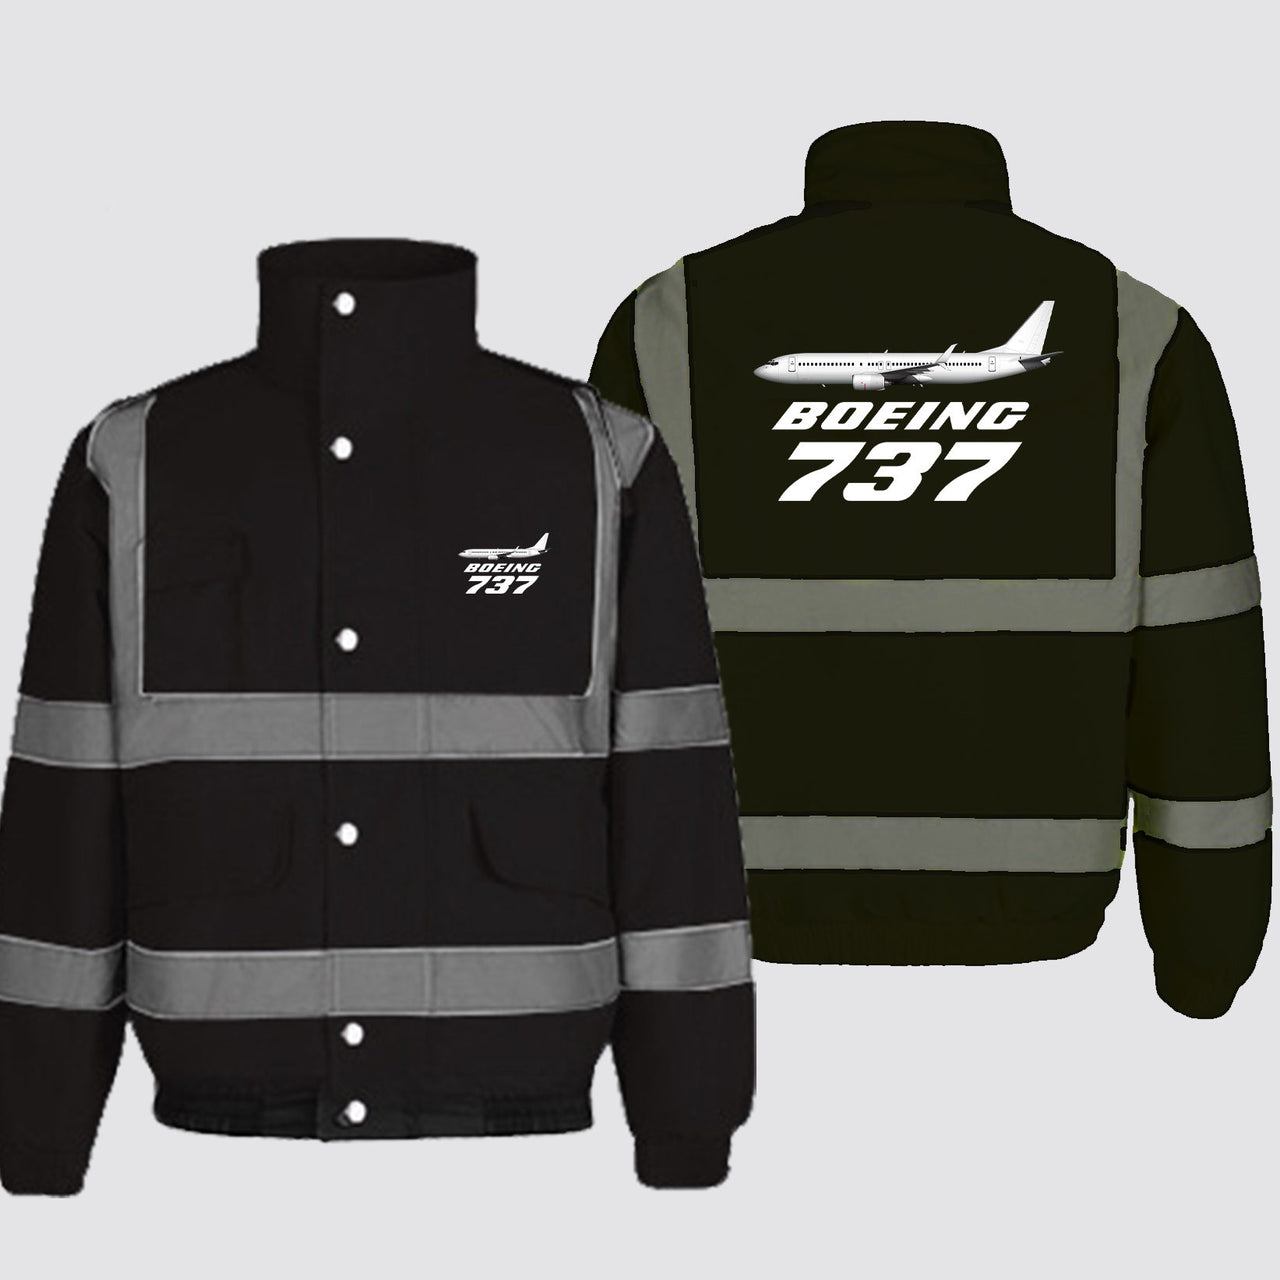 The Boeing 737 Designed Reflective Winter Jackets